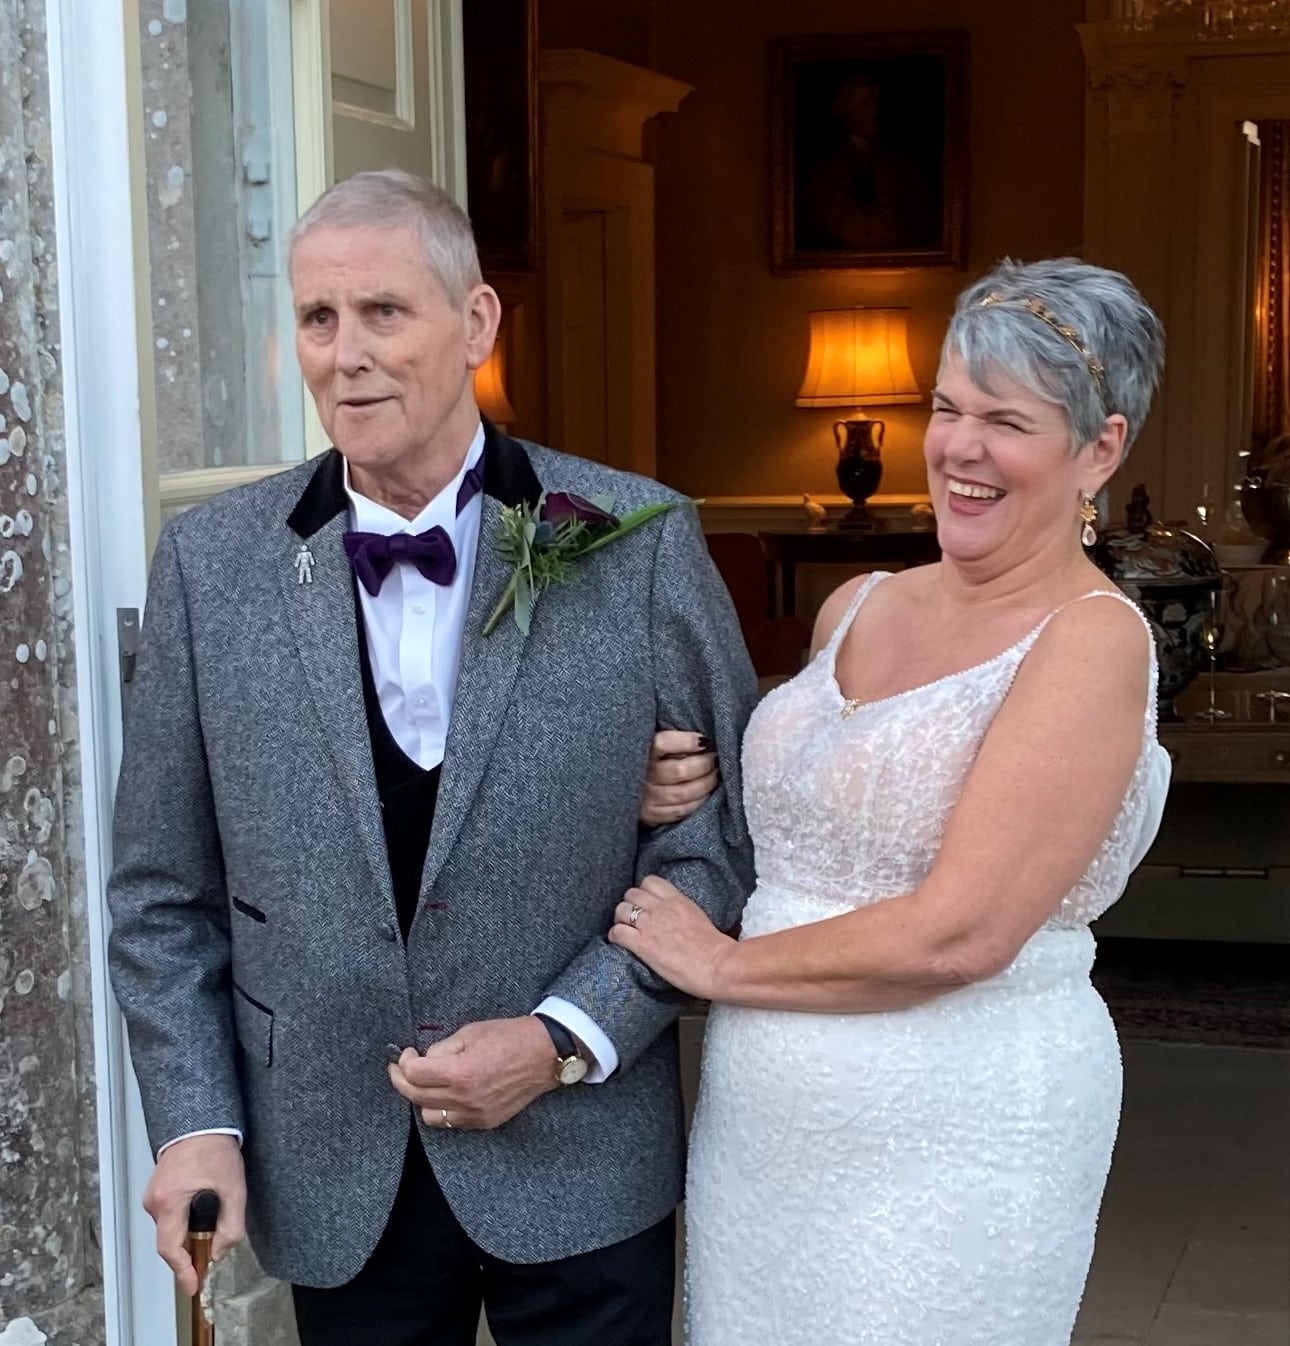 Wendy and John, <a href="http://www.camehouse.co.uk" target="_blank">Came House, Dorchester</a>